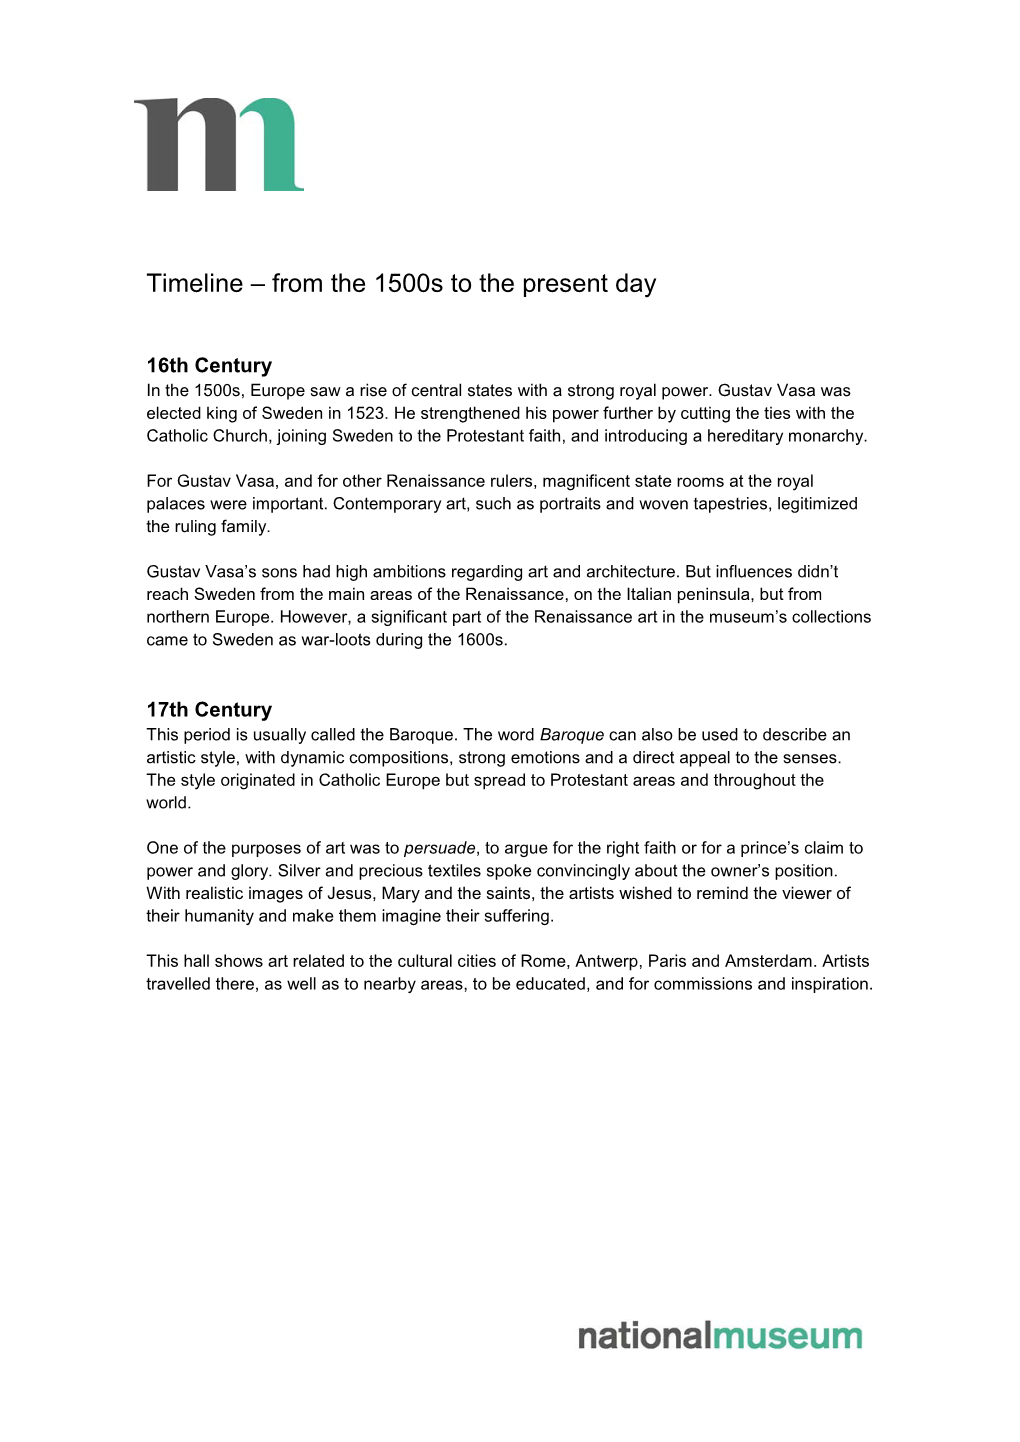 Timeline – from the 1500S to the Present Day